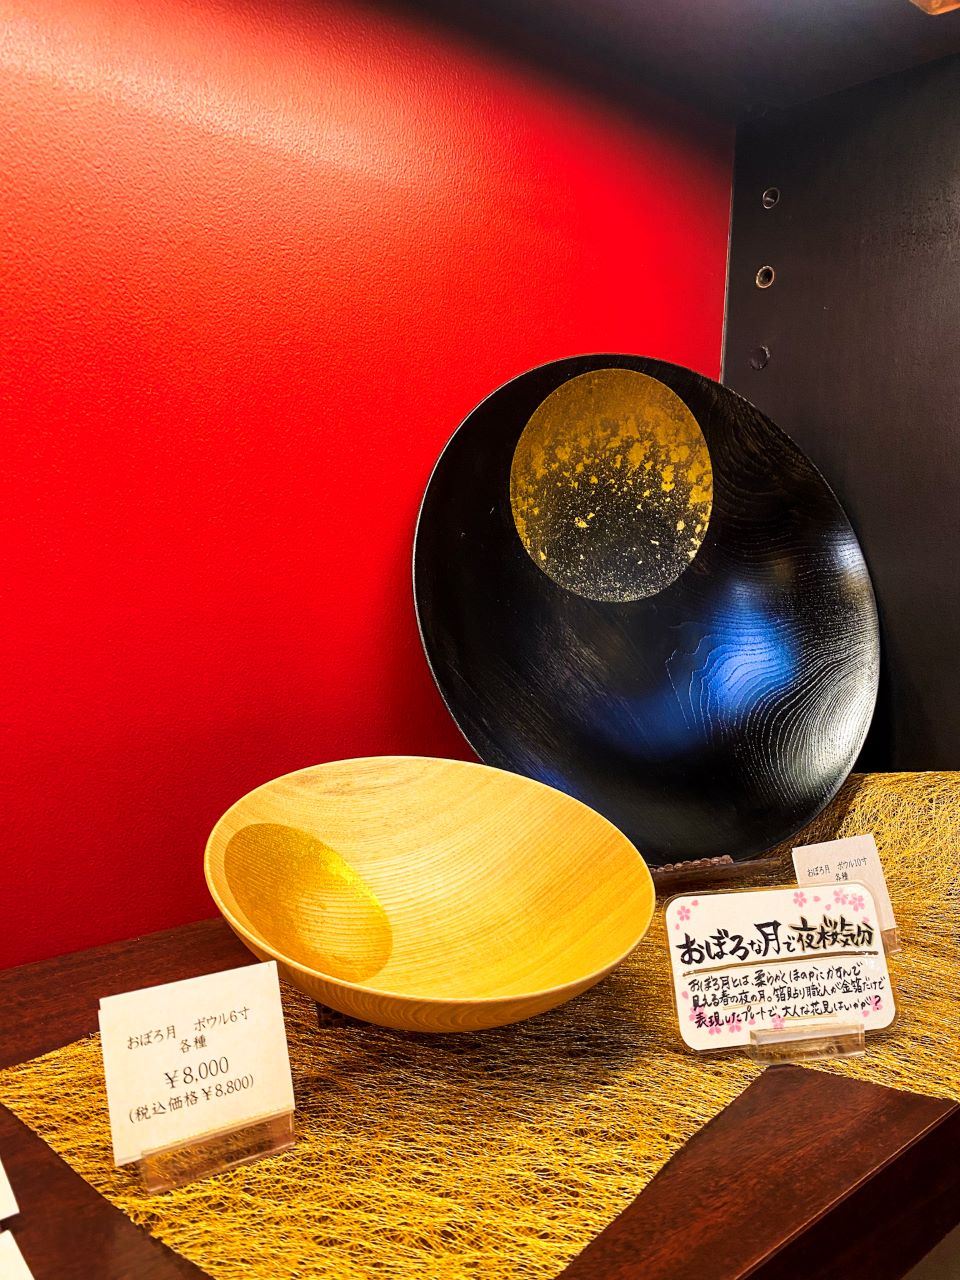 Gold leaf related souvenirs in Kanazawa